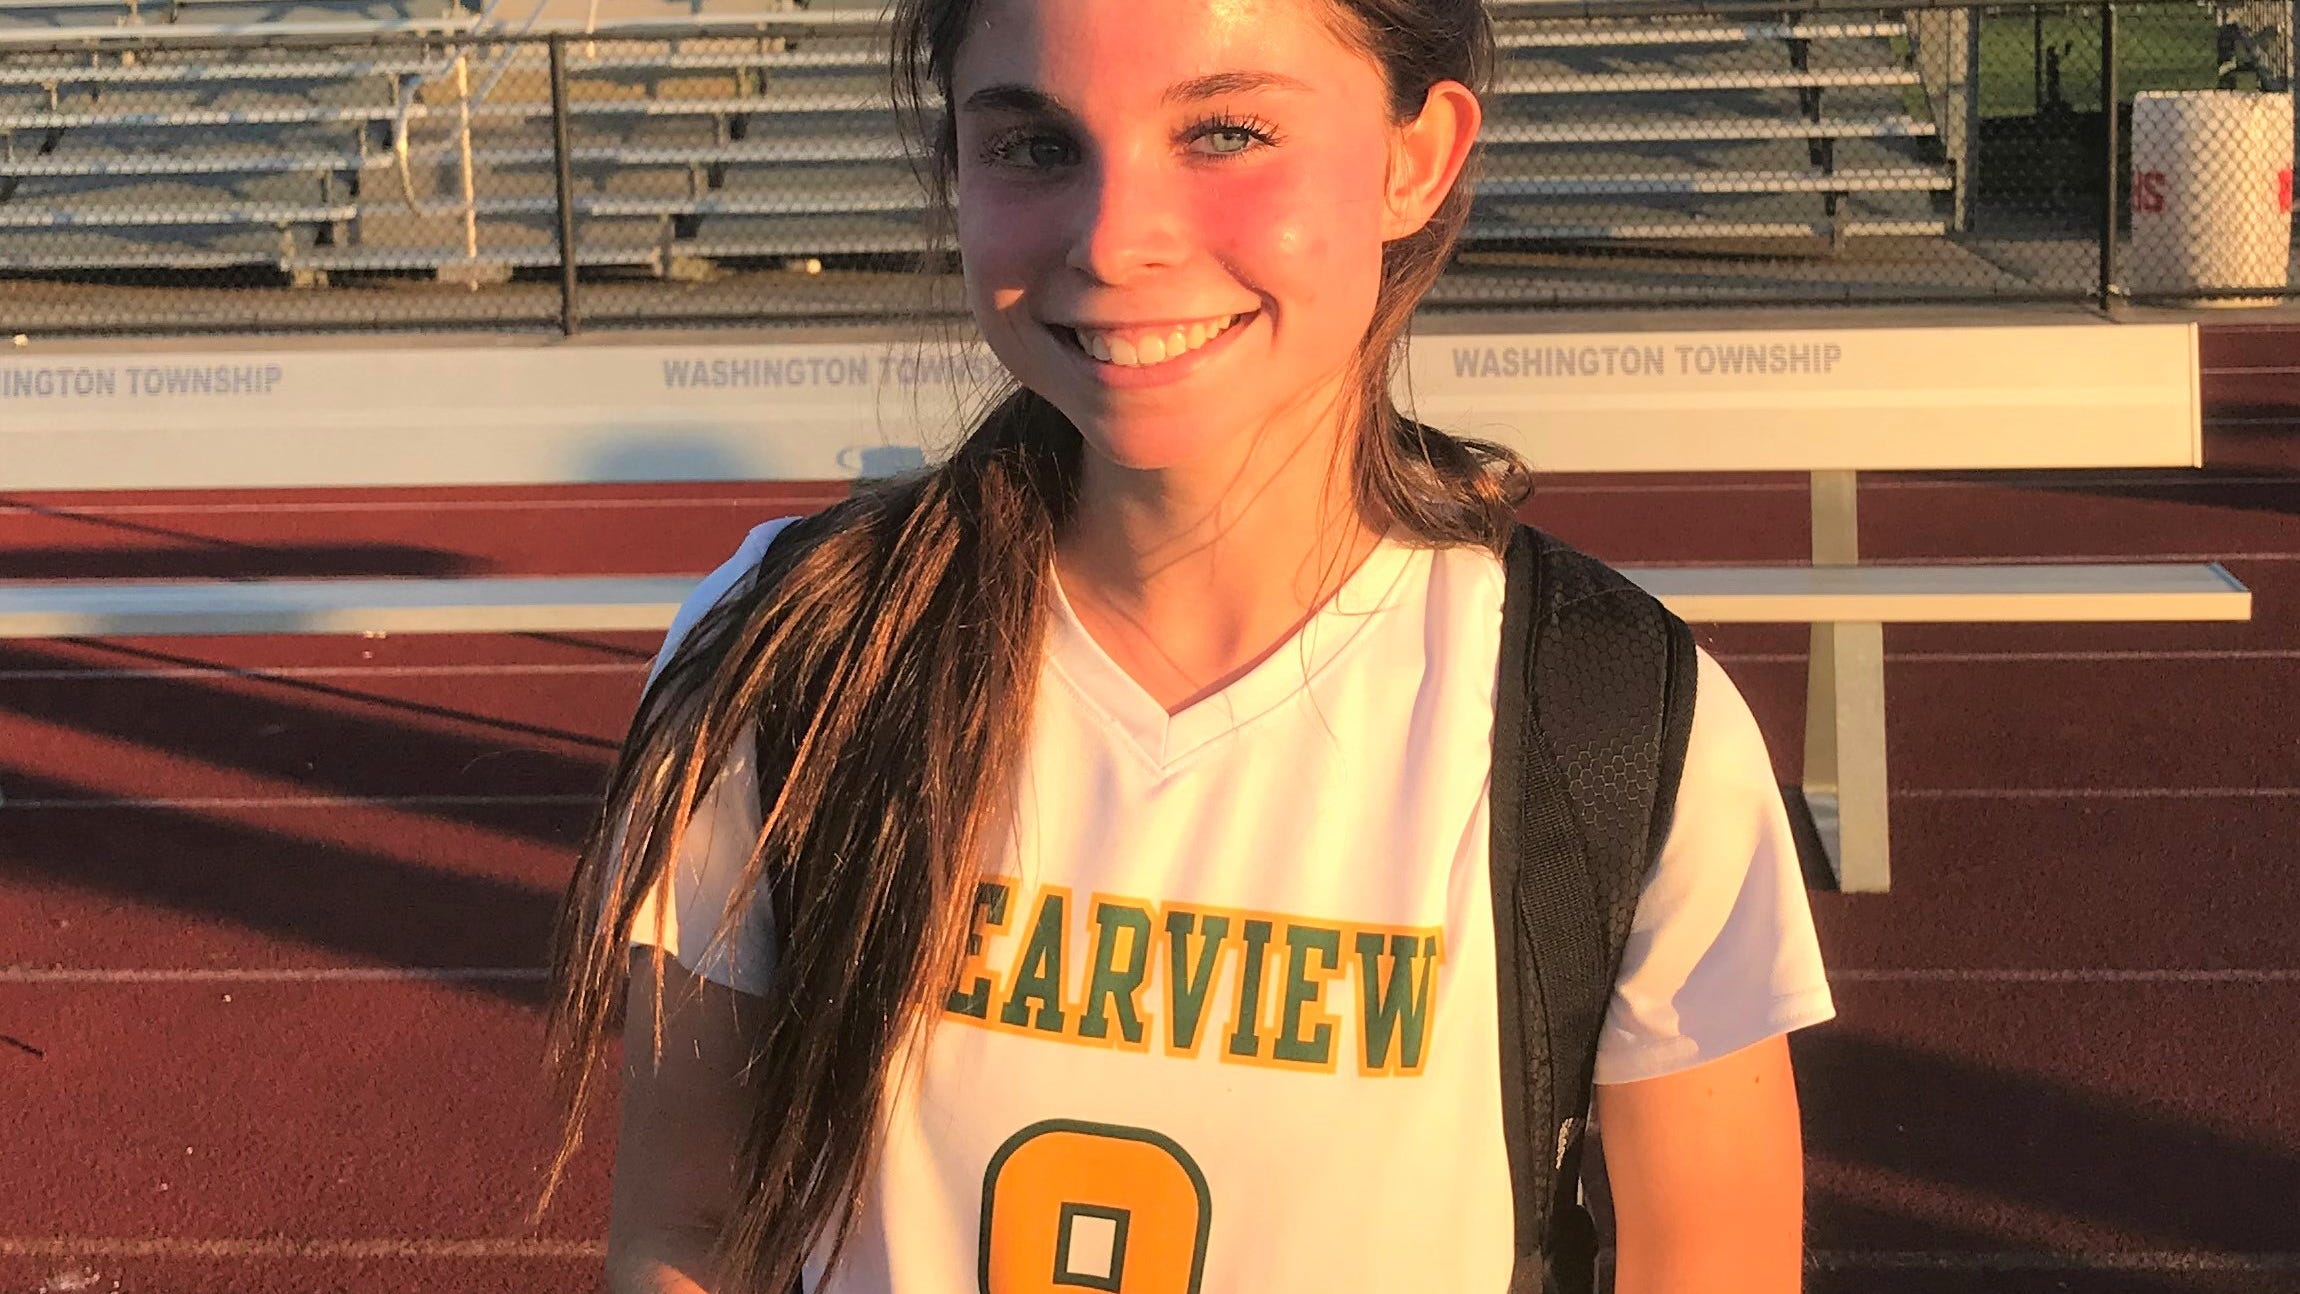  H.S. girls' soccer: Clearview's Gaiser turns patience into productivity 